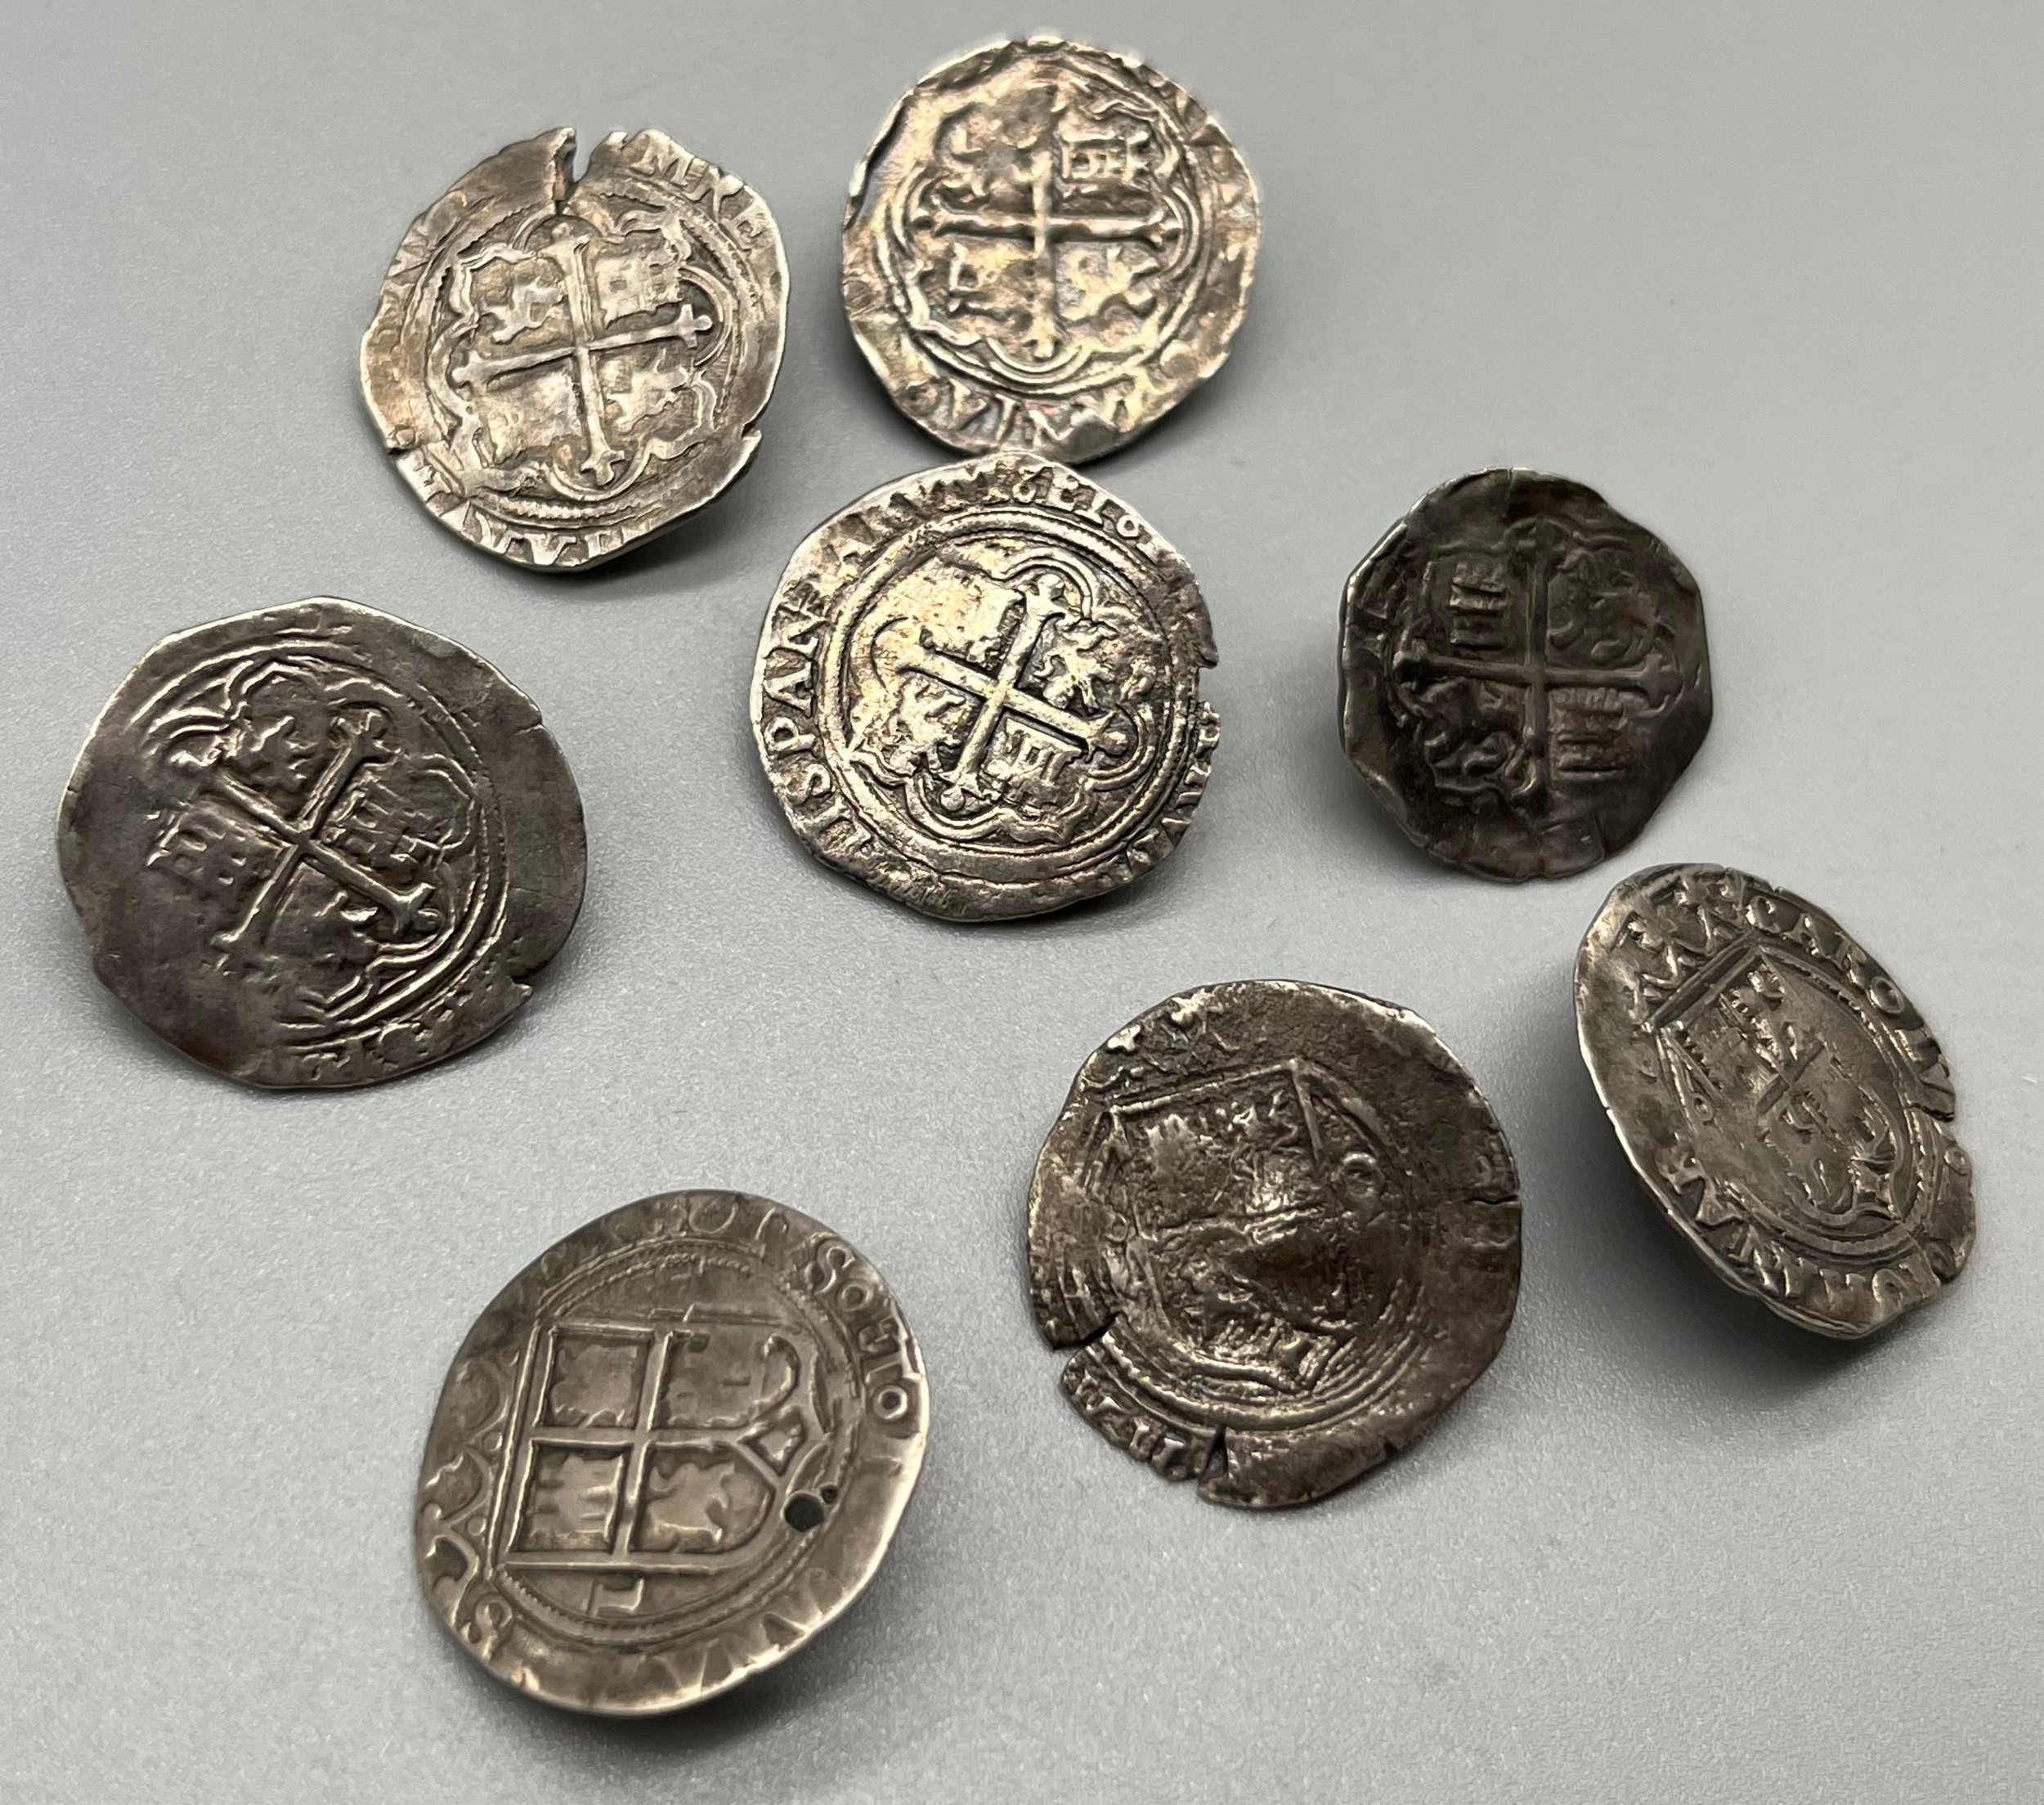 Group of Spanish 16th century Silver Real coins, mounted as buttons - Image 3 of 4